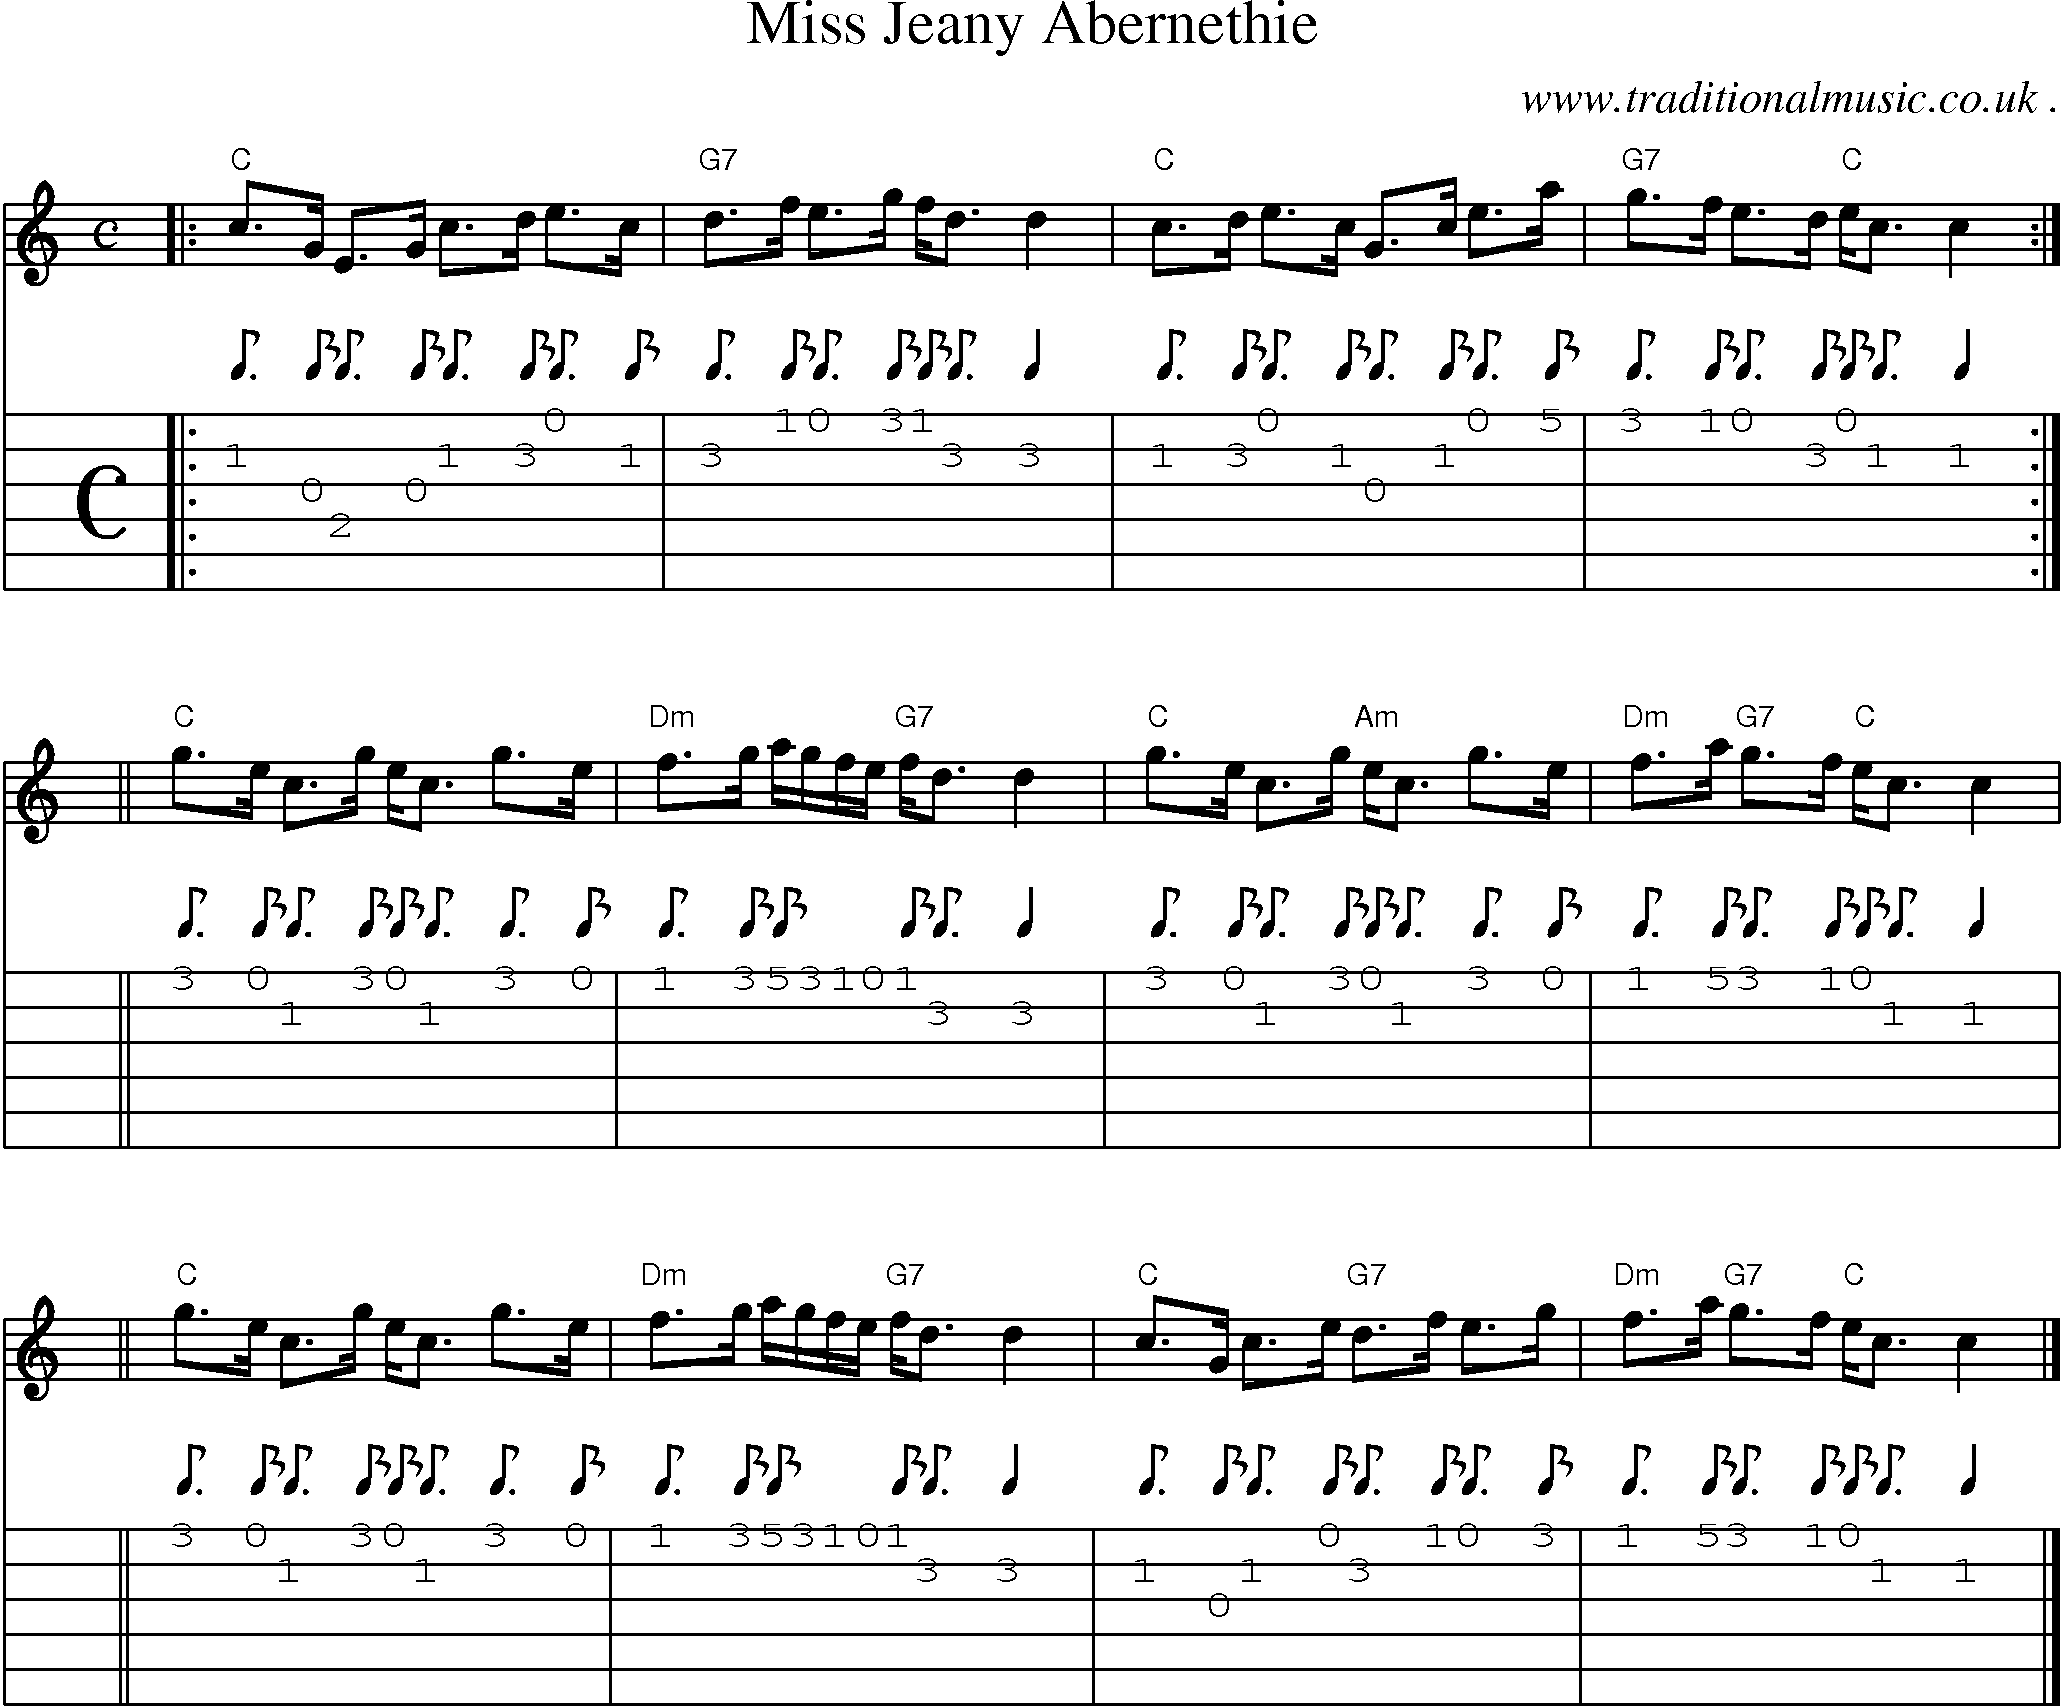 Sheet-music  score, Chords and Guitar Tabs for Miss Jeany Abernethie